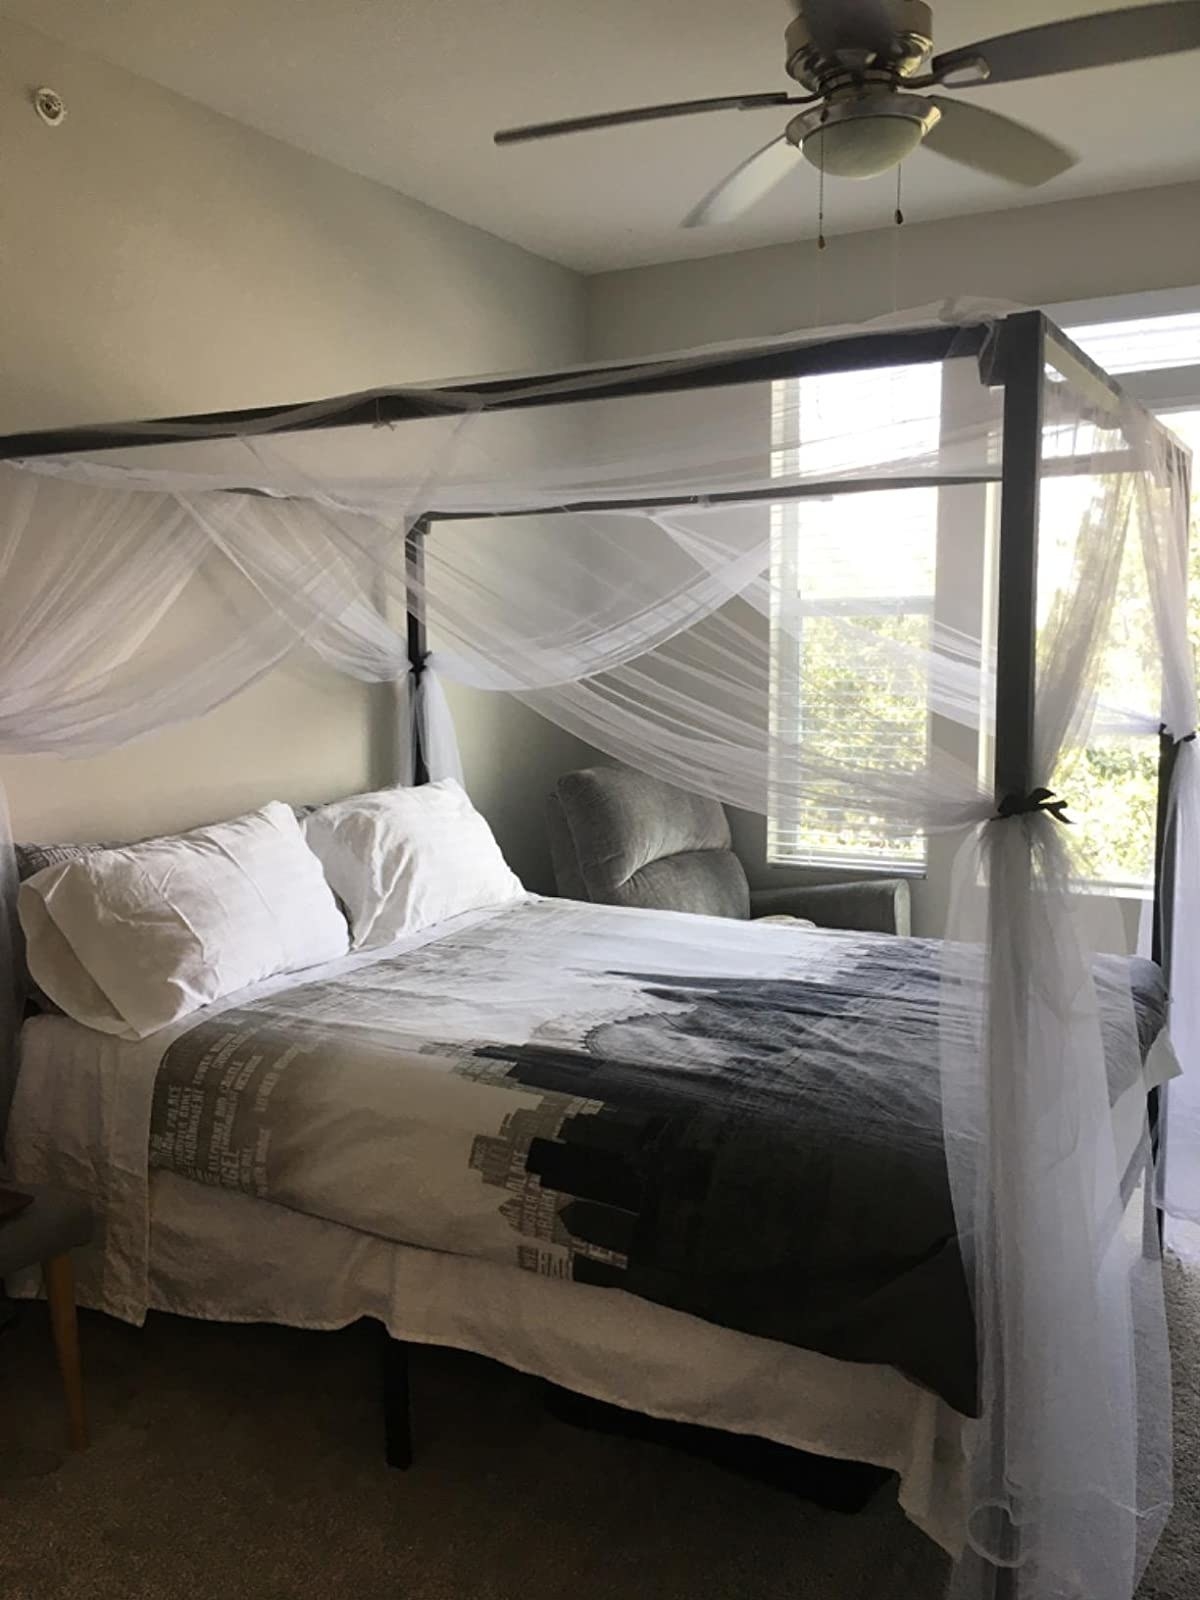 The canopy bedframe assembled in a bedroom. It has sheer curtains on it, tied to each of the four corners. It looks really nice in the small space!